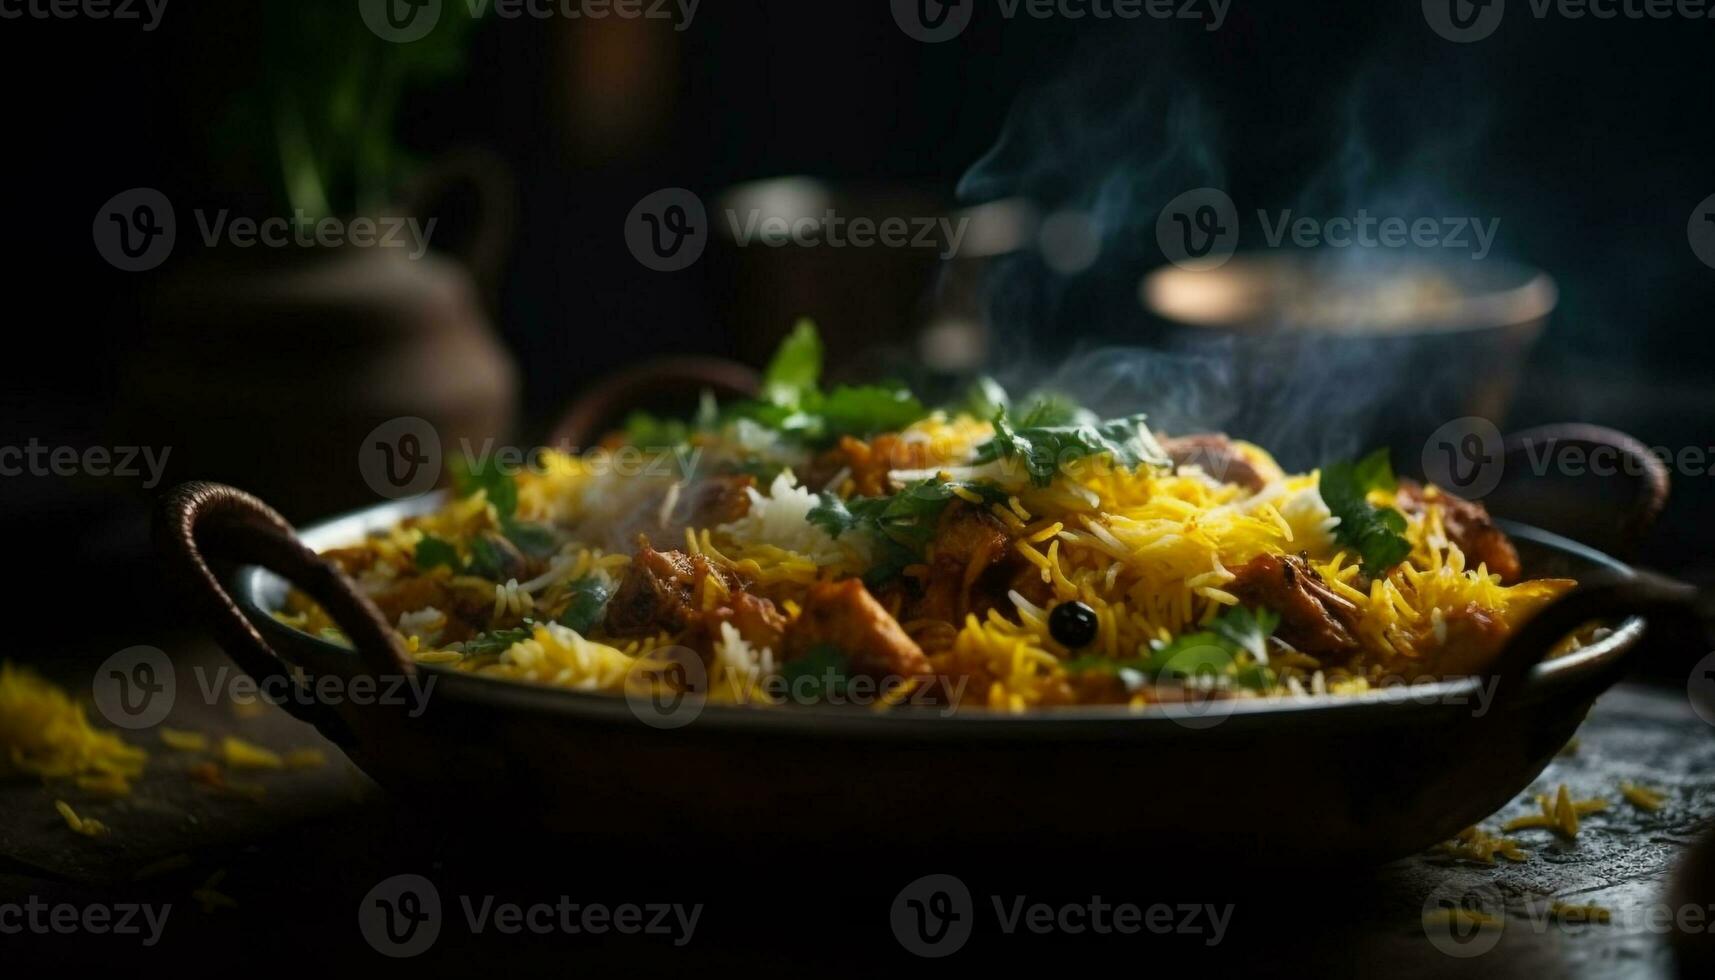 Gourmet paella cooked with saffron, seafood, and vegetables generated by AI photo